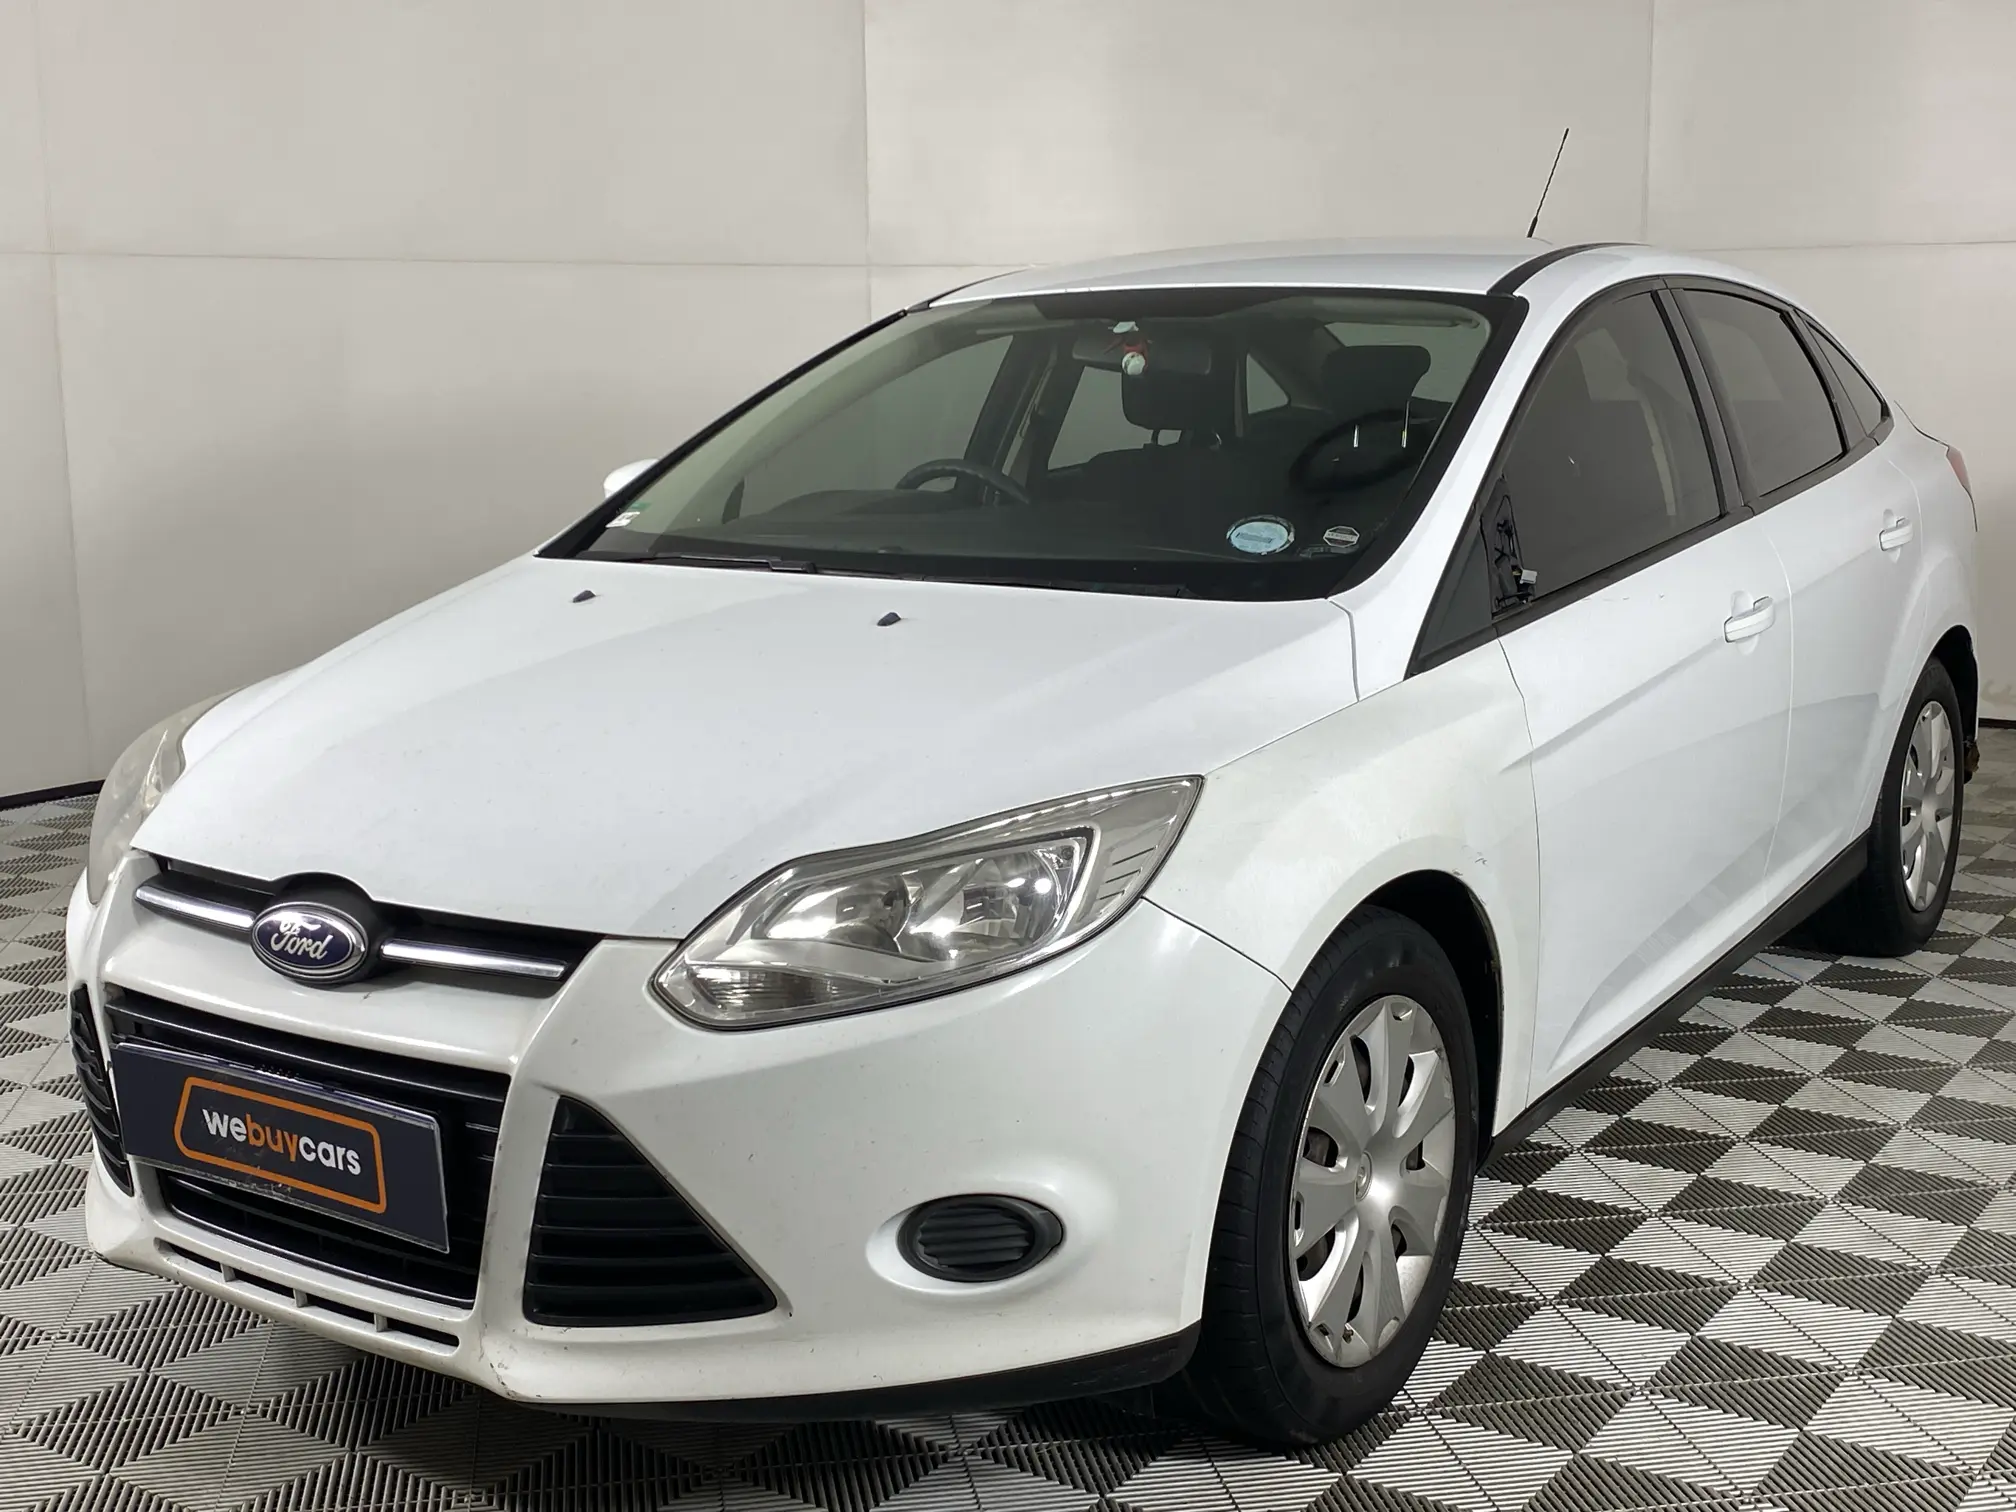 2013 Ford Focus 1.6 TI VCT Ambiente 5-Door